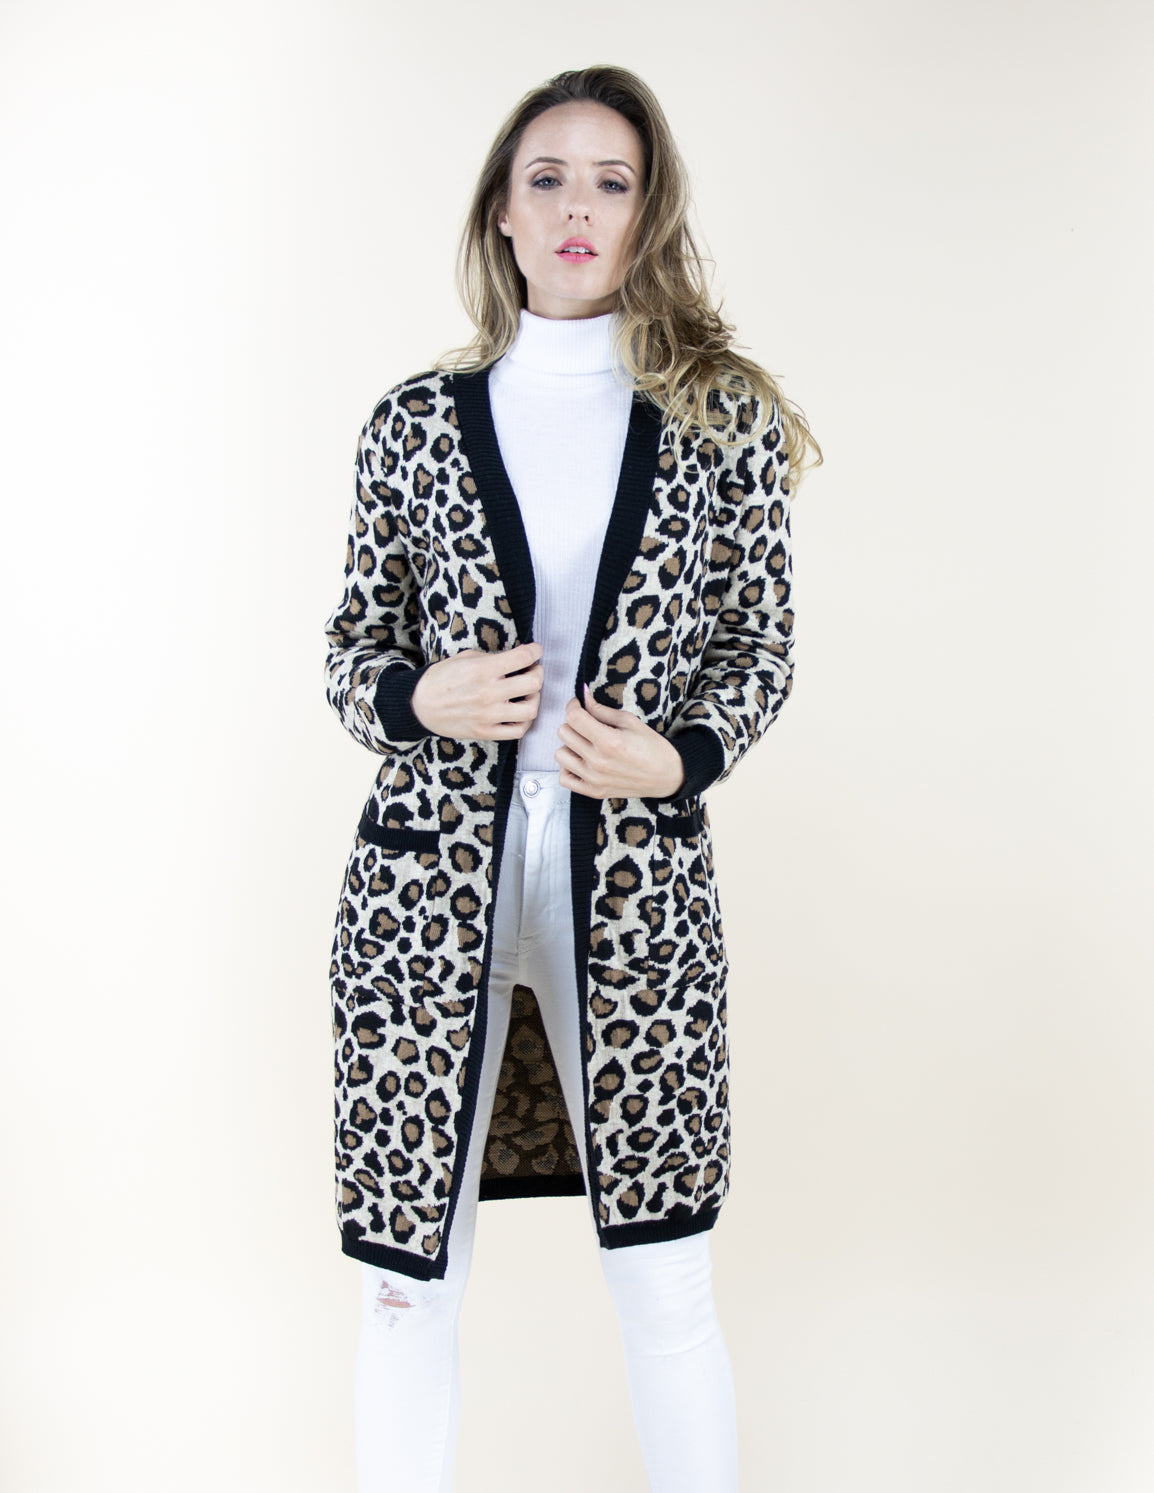 Leopard Print Long Cardigan Sweater with Front Pockets SALE 40% OFF  NOW $41.97